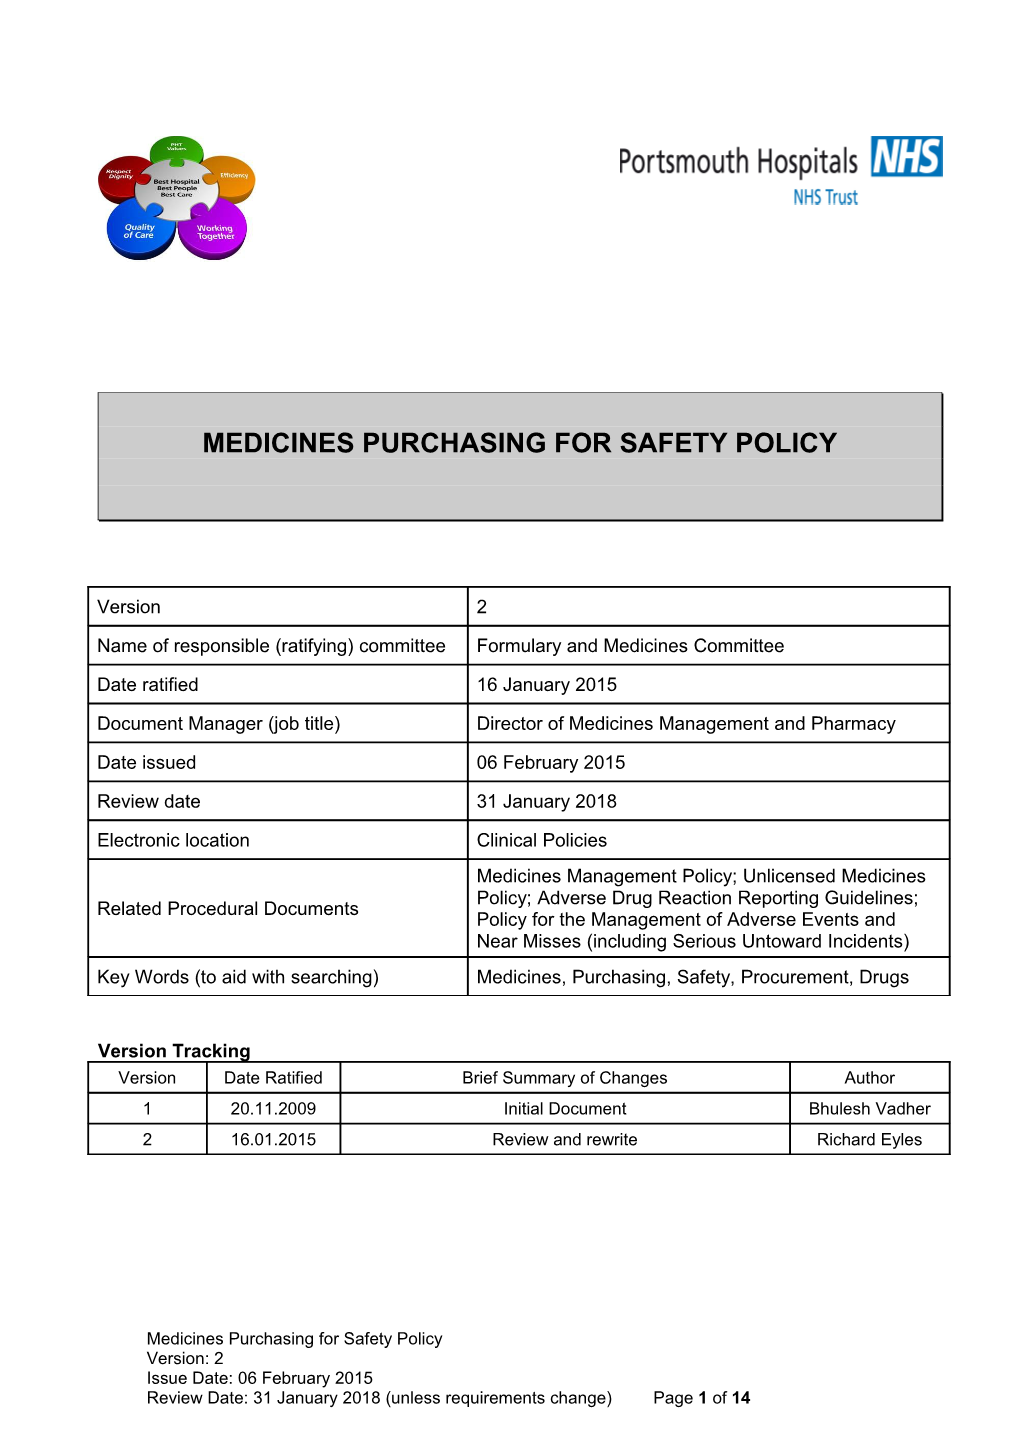 Medicines Purchasing for Safety Policy